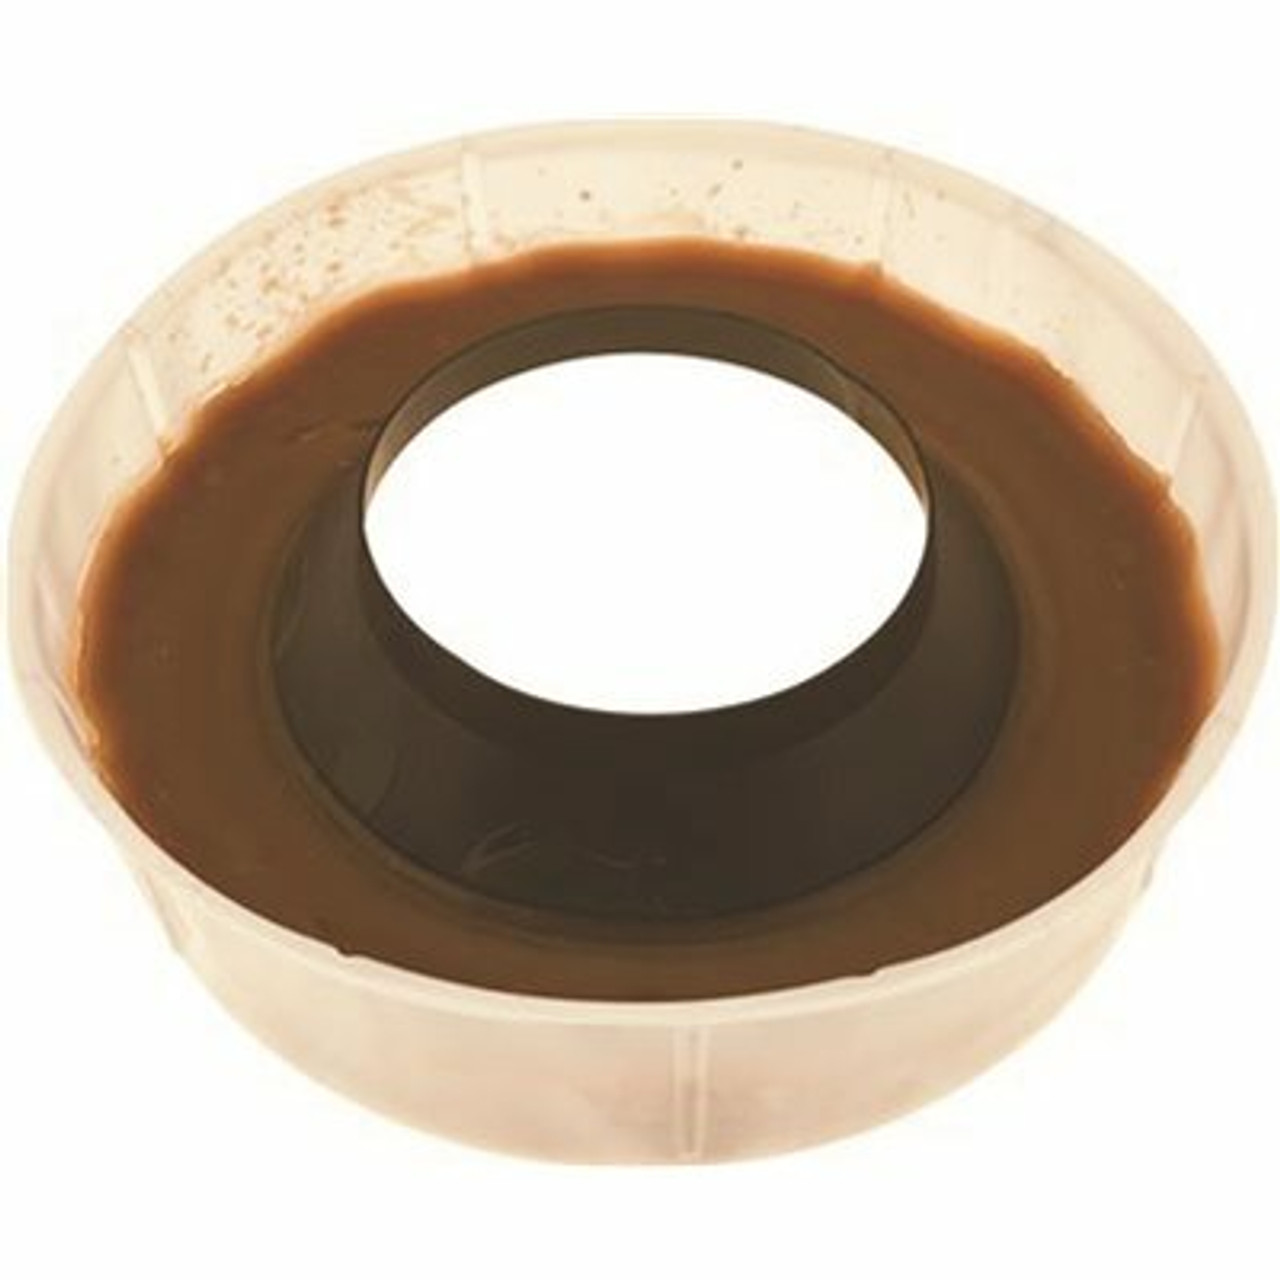 Premier Wax Ring Kit With Polyethylene Flange (8-Pack)